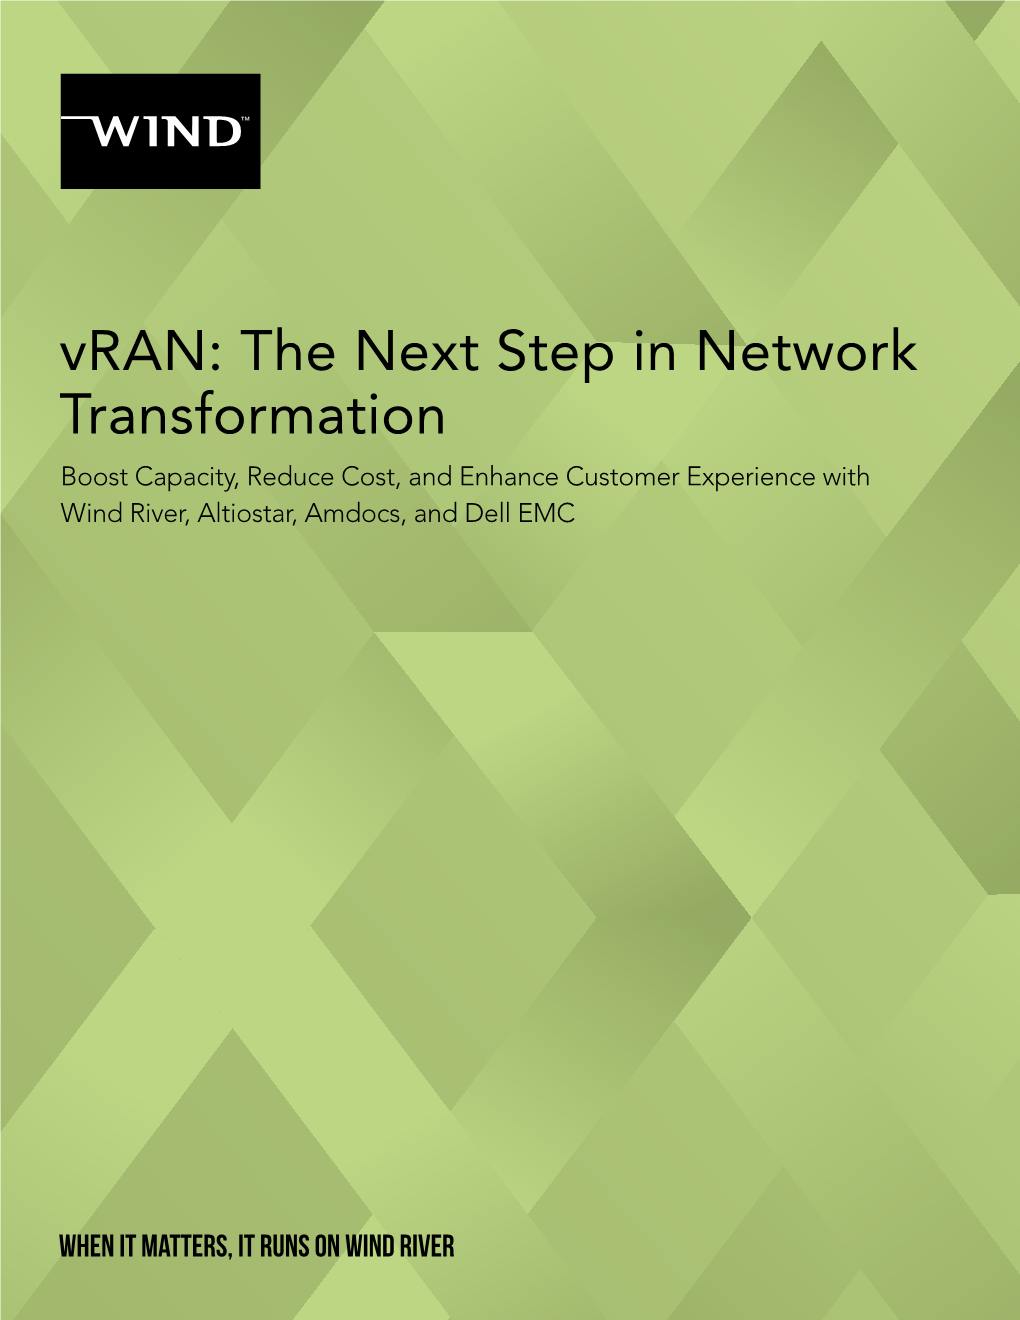 Vran: the Next Step in Network Transformation Boost Capacity, Reduce Cost, and Enhance Customer Experience with Wind River, Altiostar, Amdocs, and Dell EMC